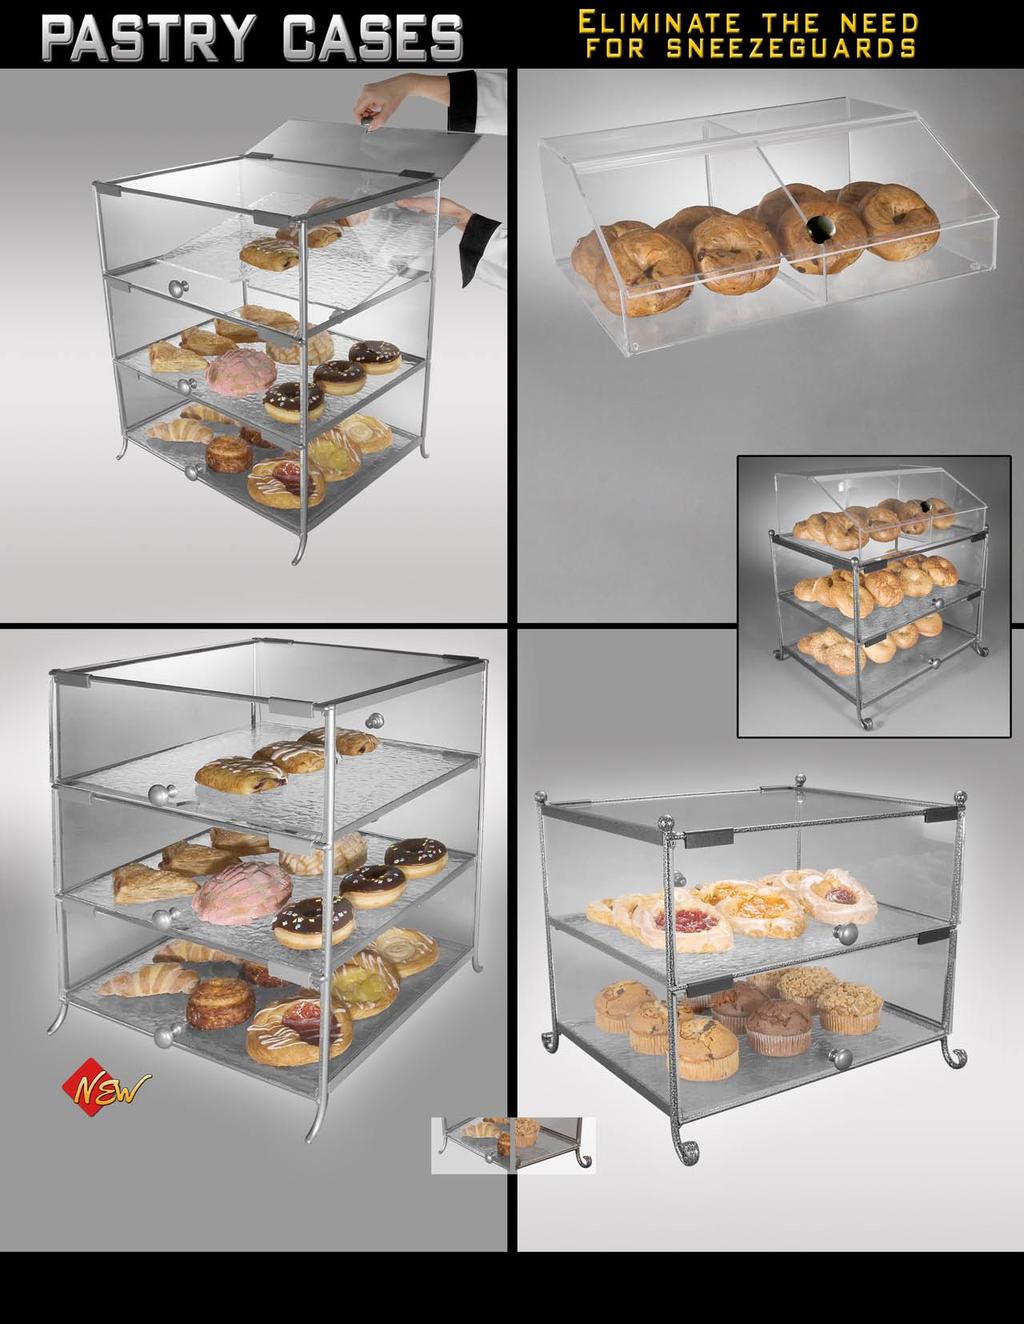 u Larger capacity than the competition u Sized to fit all models of our Pastry Case u Clear Acrylic divider separates baked goods BIN BAGEL BAGEL BIN Bagel Bin (W)14-35 cm (L)18-45 cm (H)7-18 cm 9